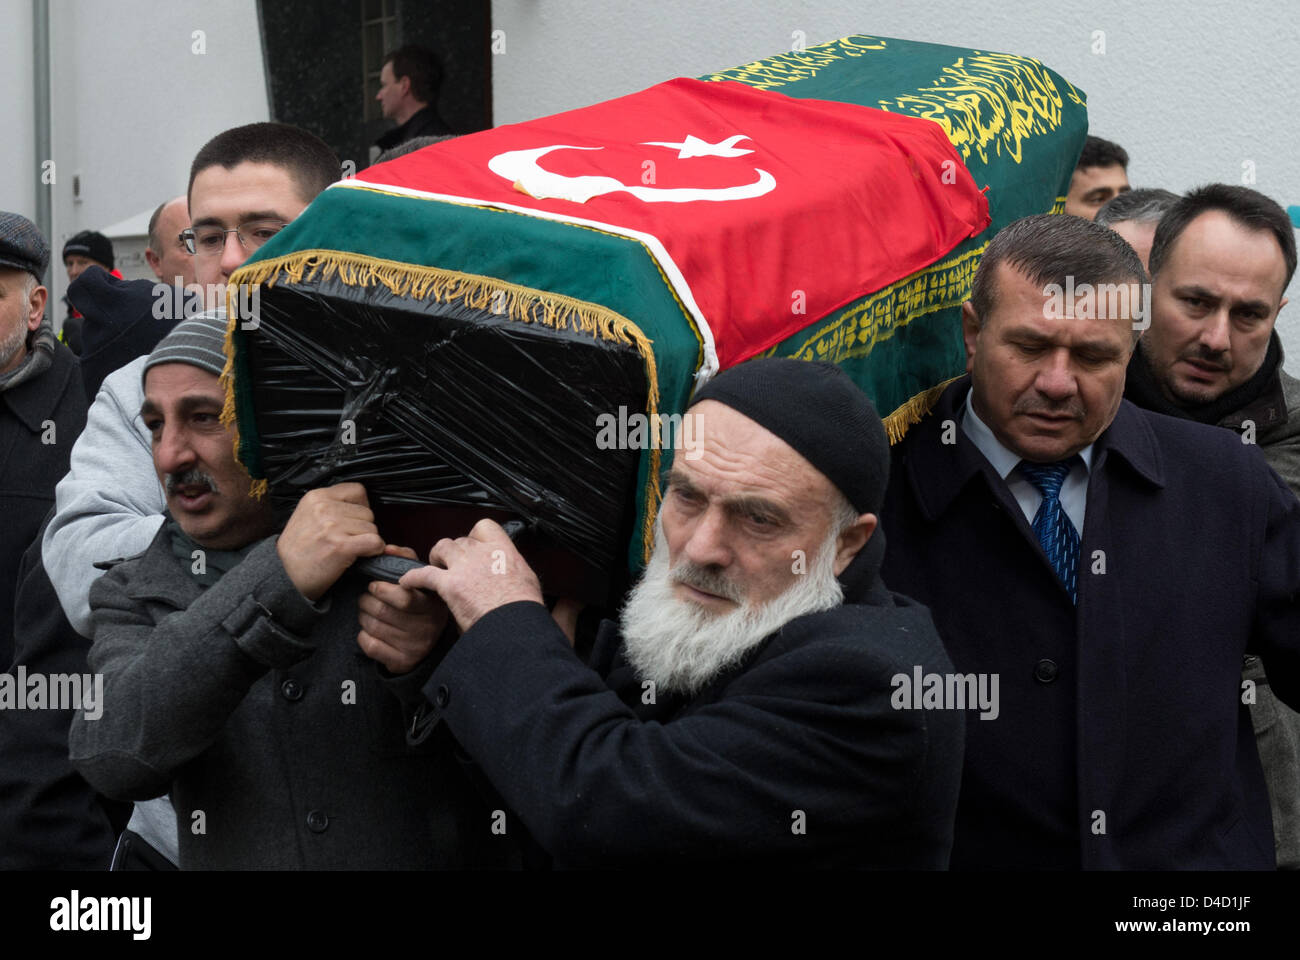 Men carry the caskets during the funeral service for the victims of the ...